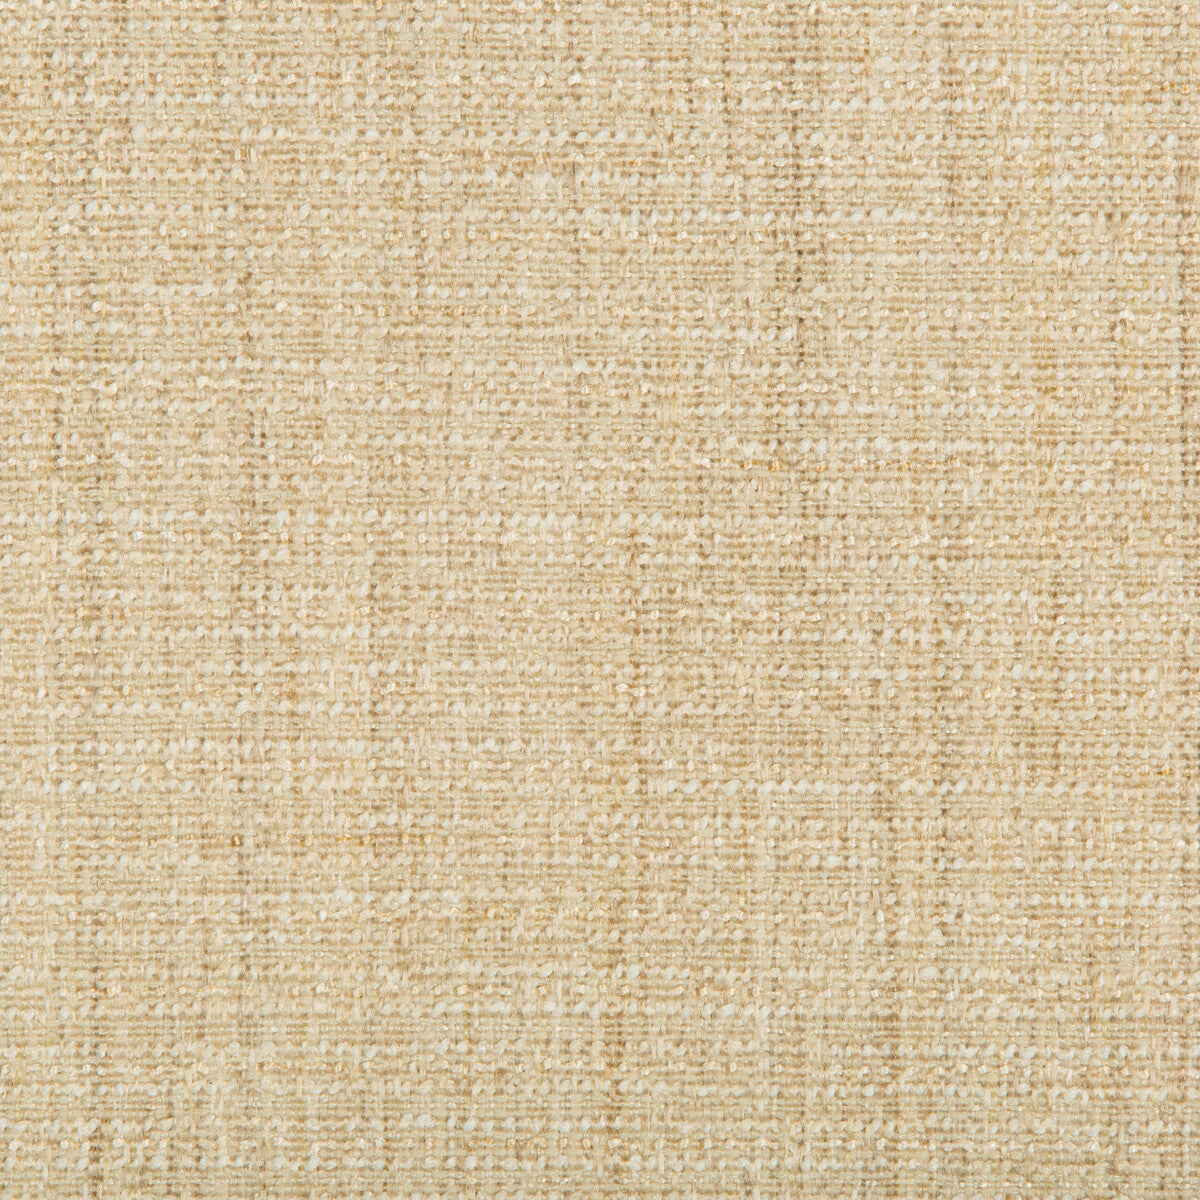 Kravet Contract fabric in 35410-14 color - pattern 35410.14.0 - by Kravet Contract in the Crypton Incase collection